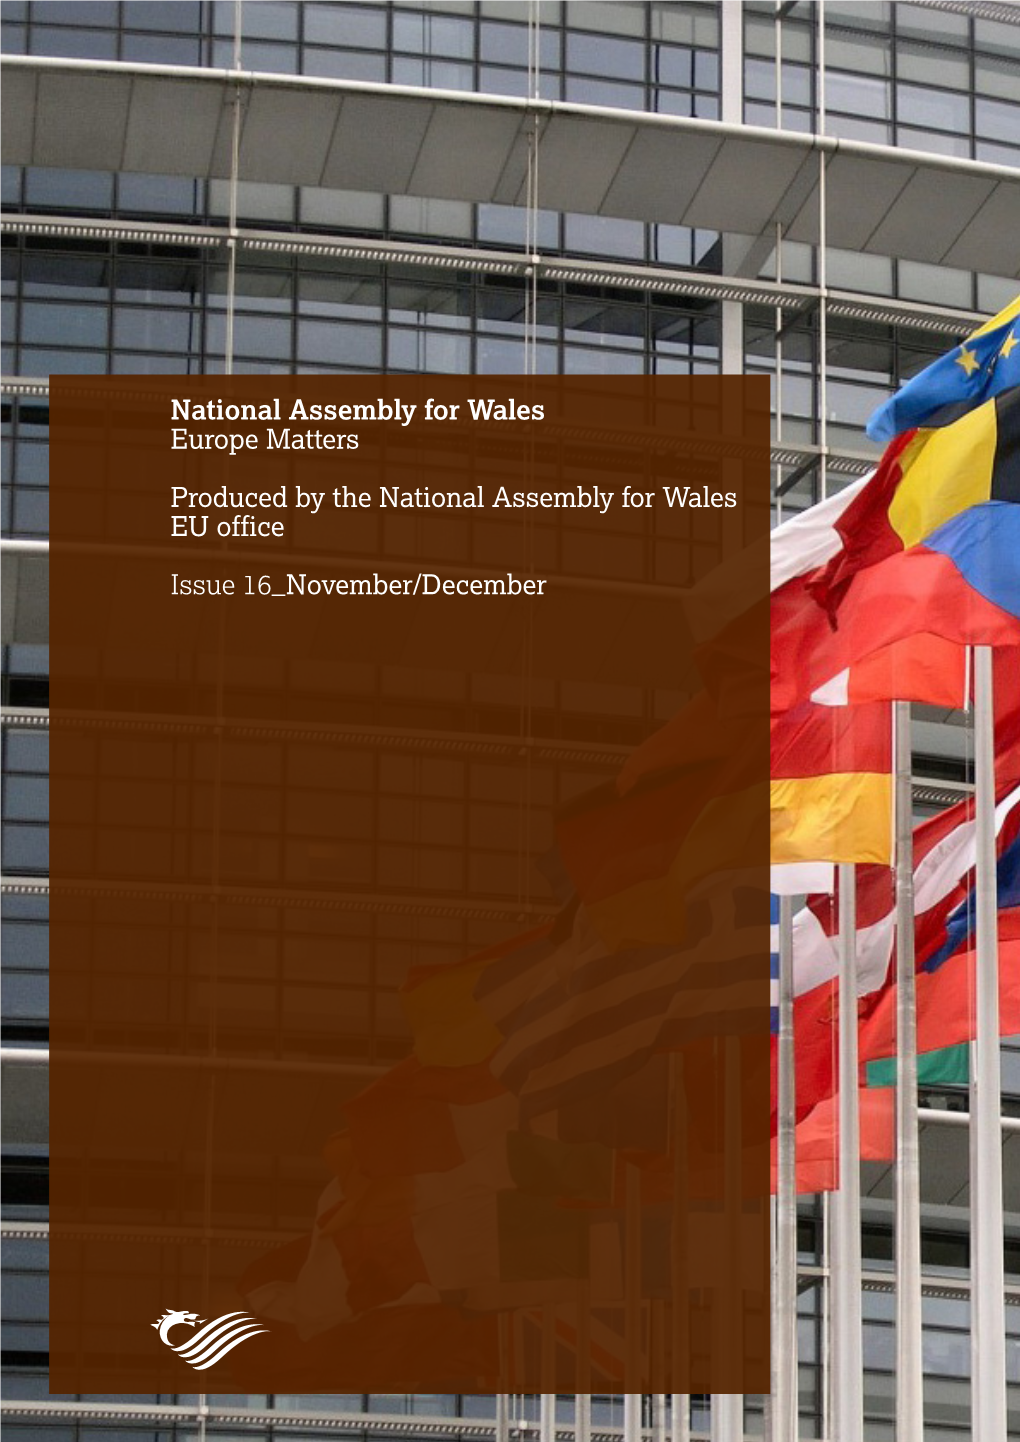 National Assembly for Wales Europe Matters